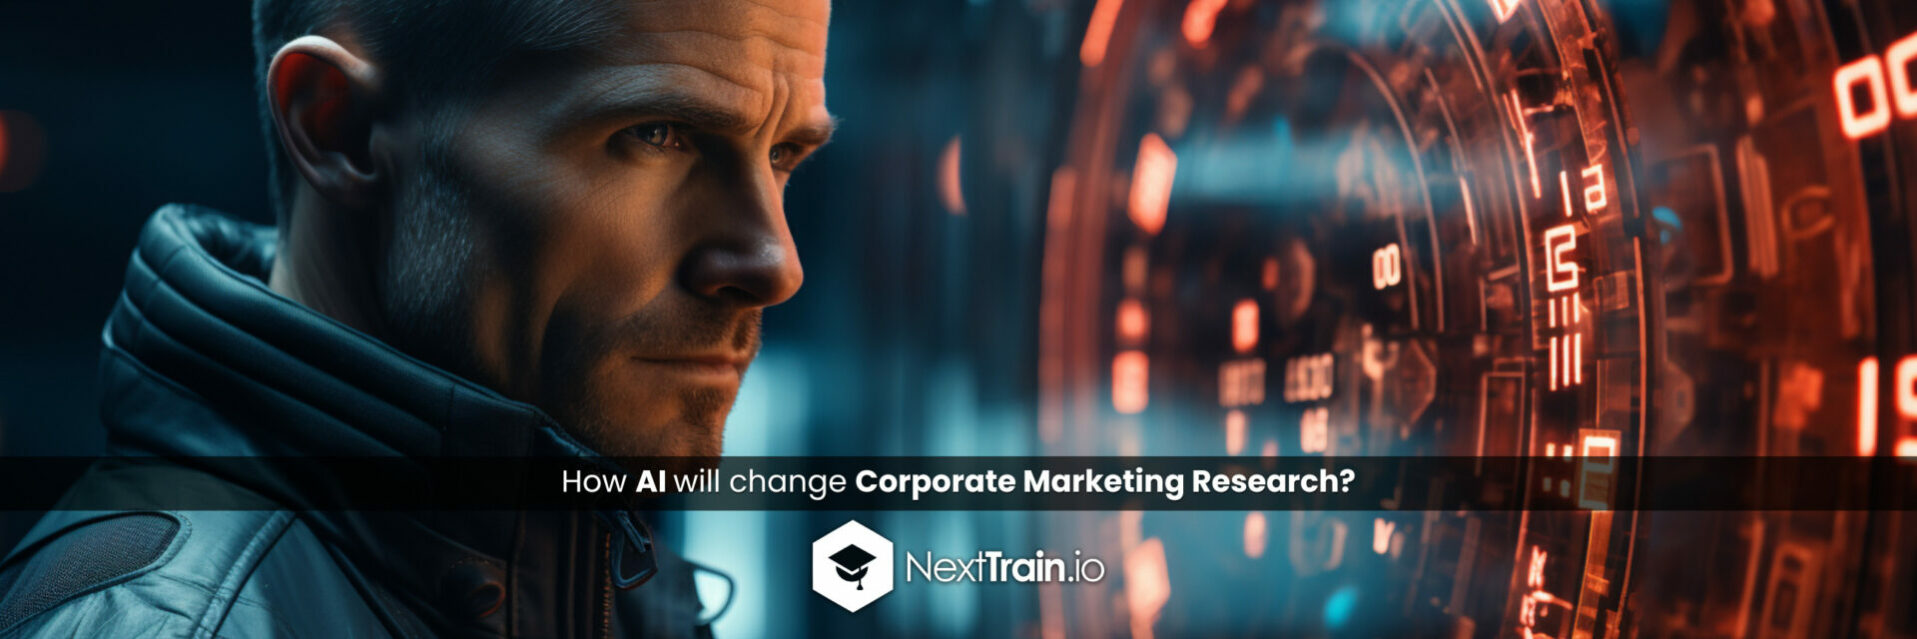 How AI will change Corporate Marketing Research?